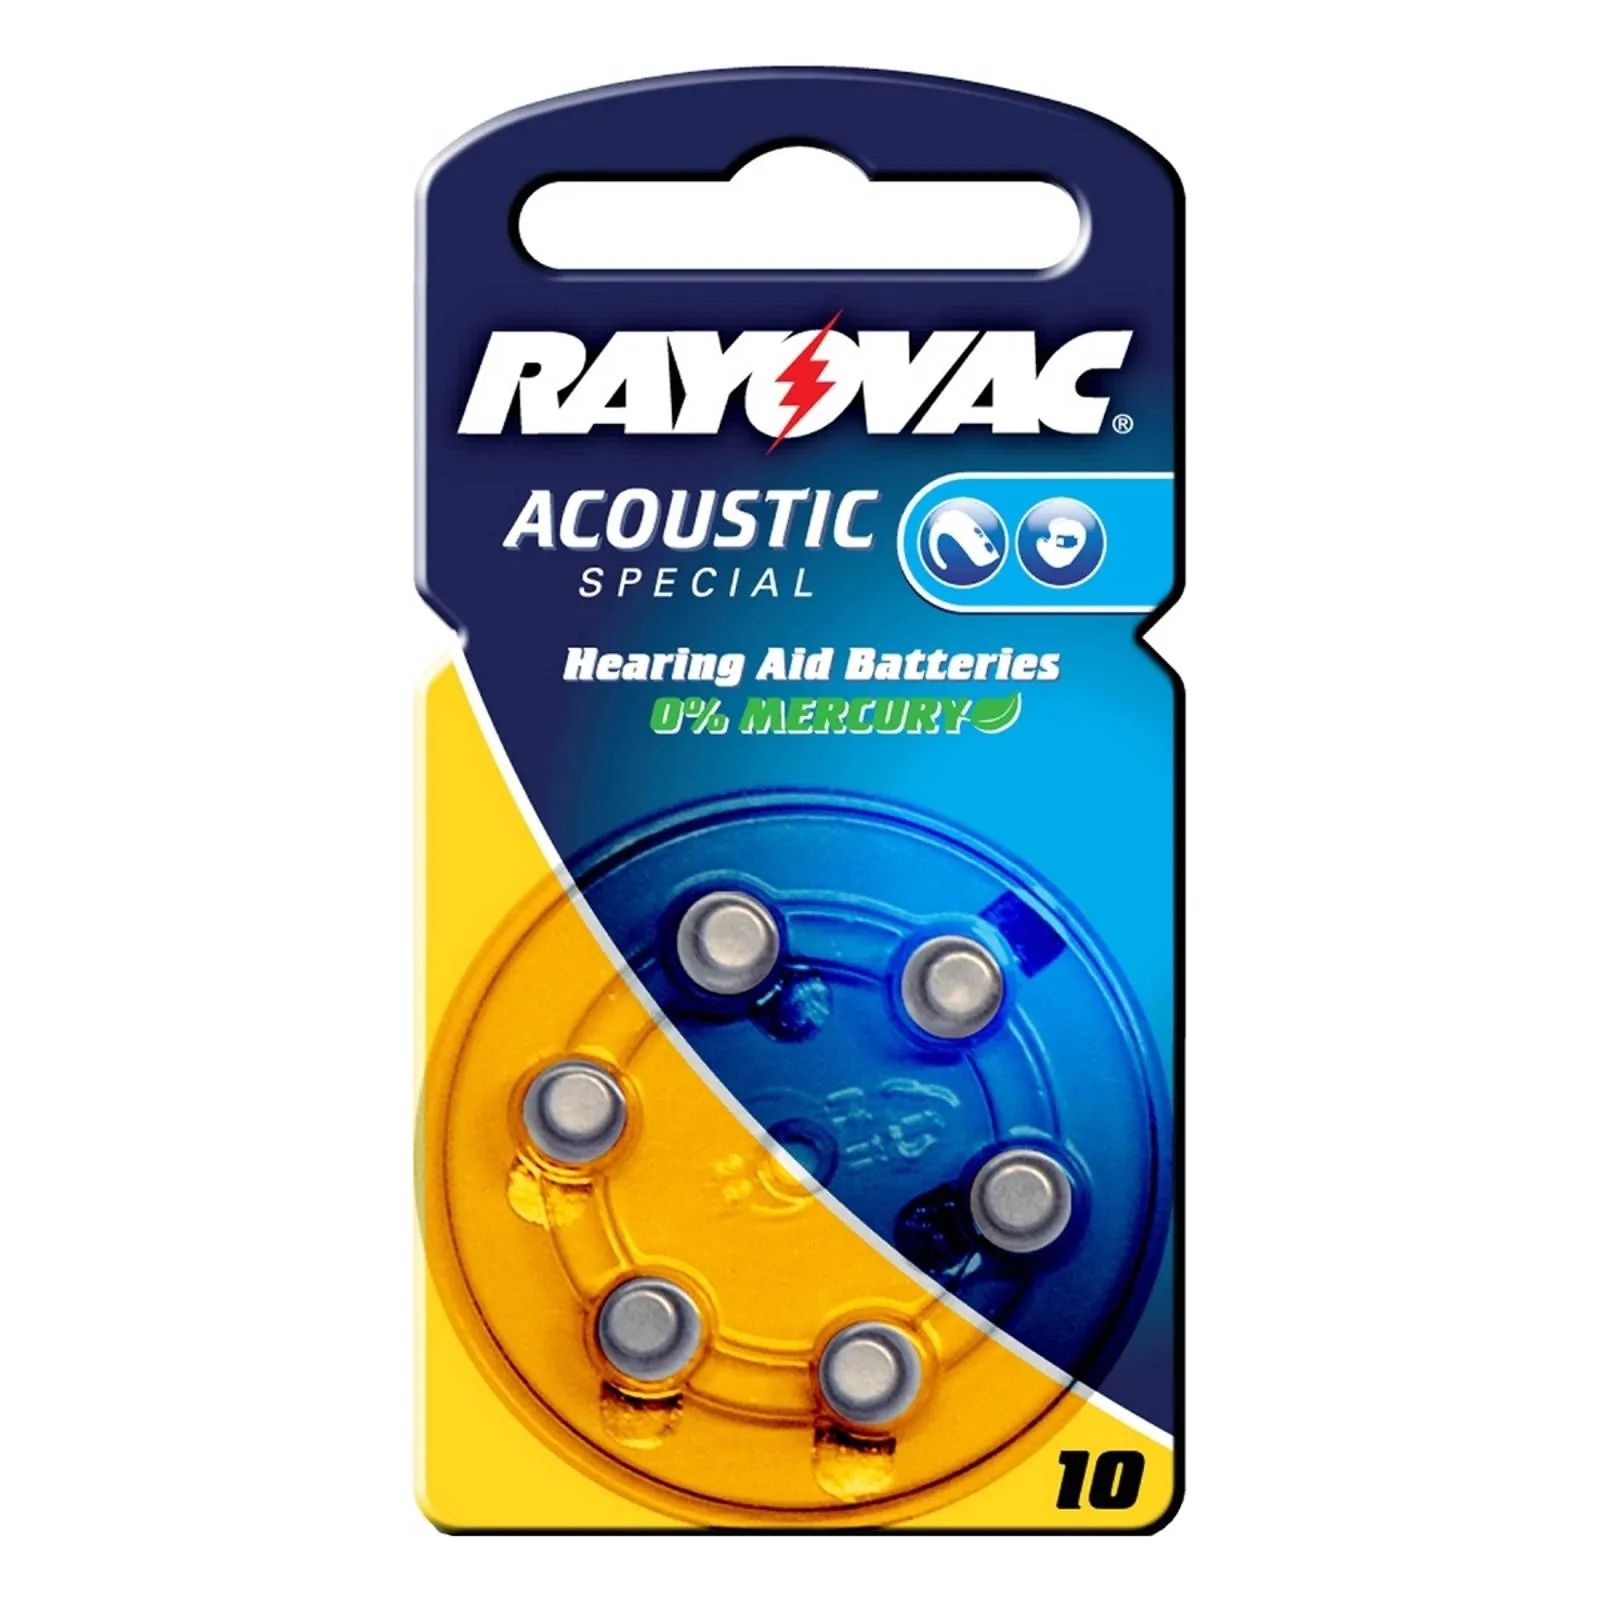 Rayovac 10 Acoustic 1.4 V, 105mAh button cell